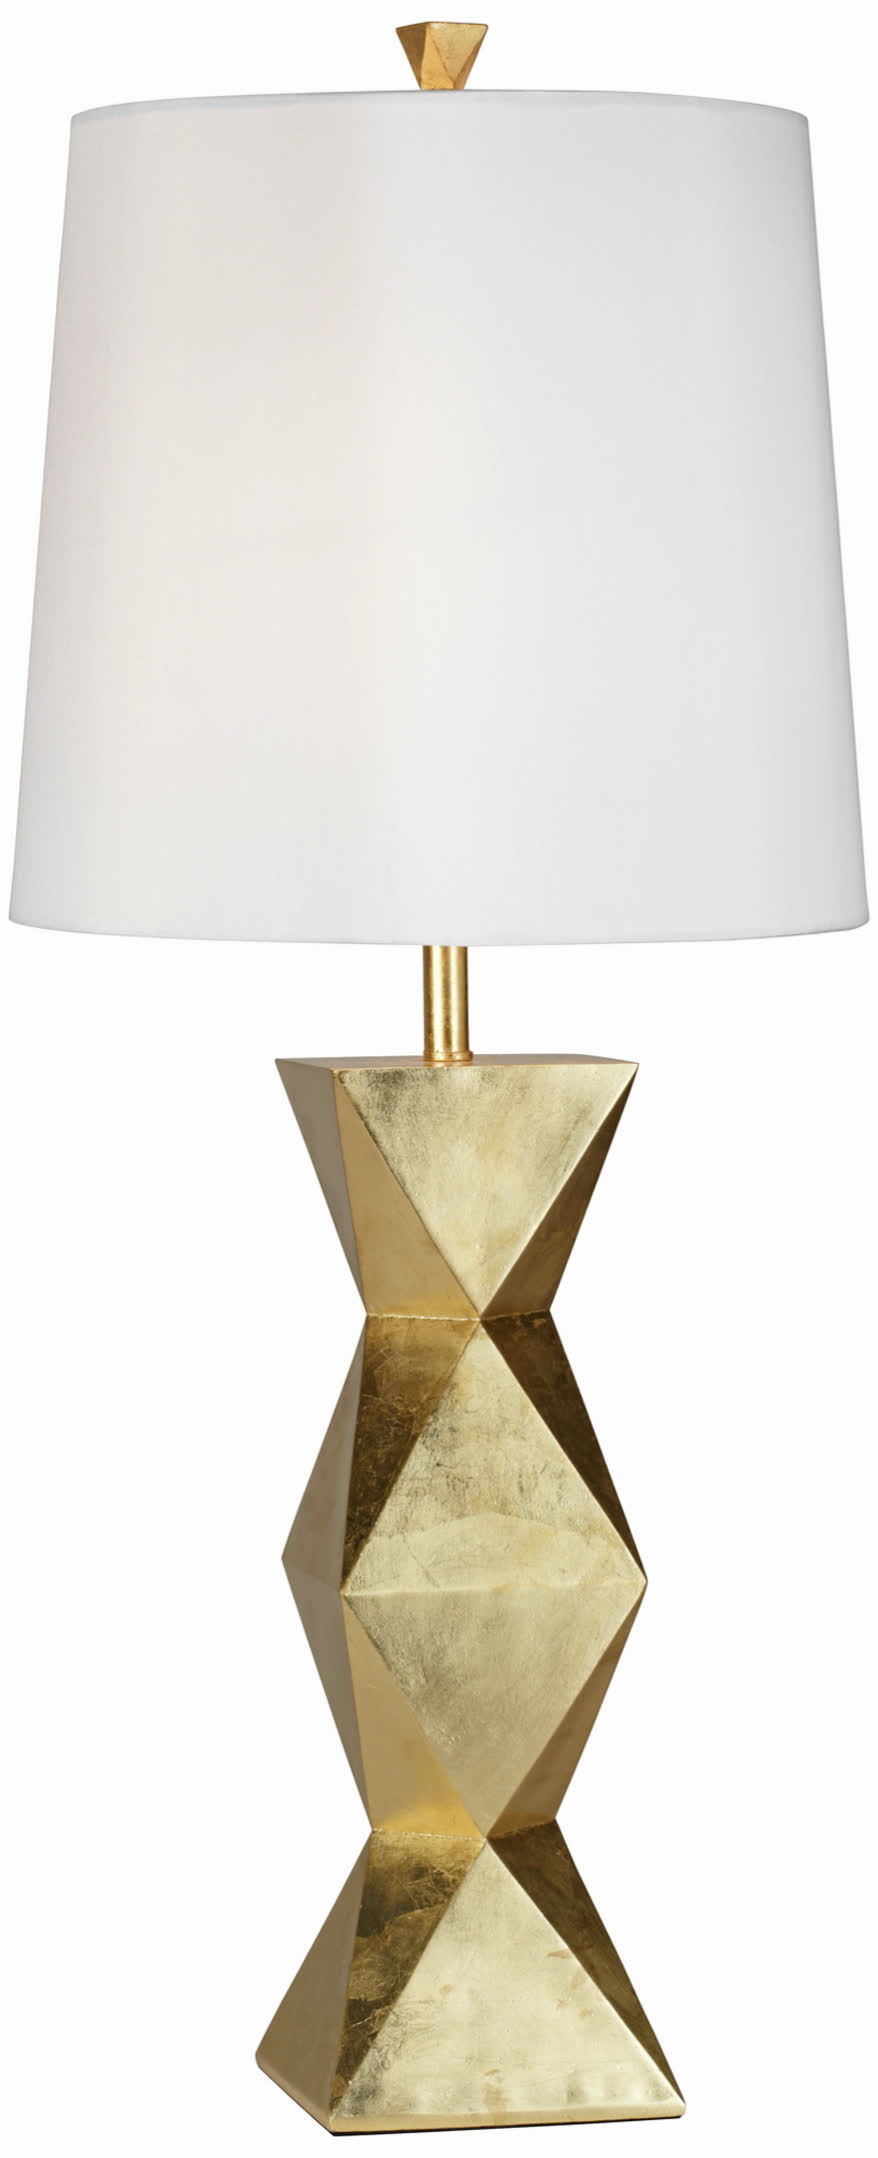 Ripley - Table Lamp - Gold Leaf